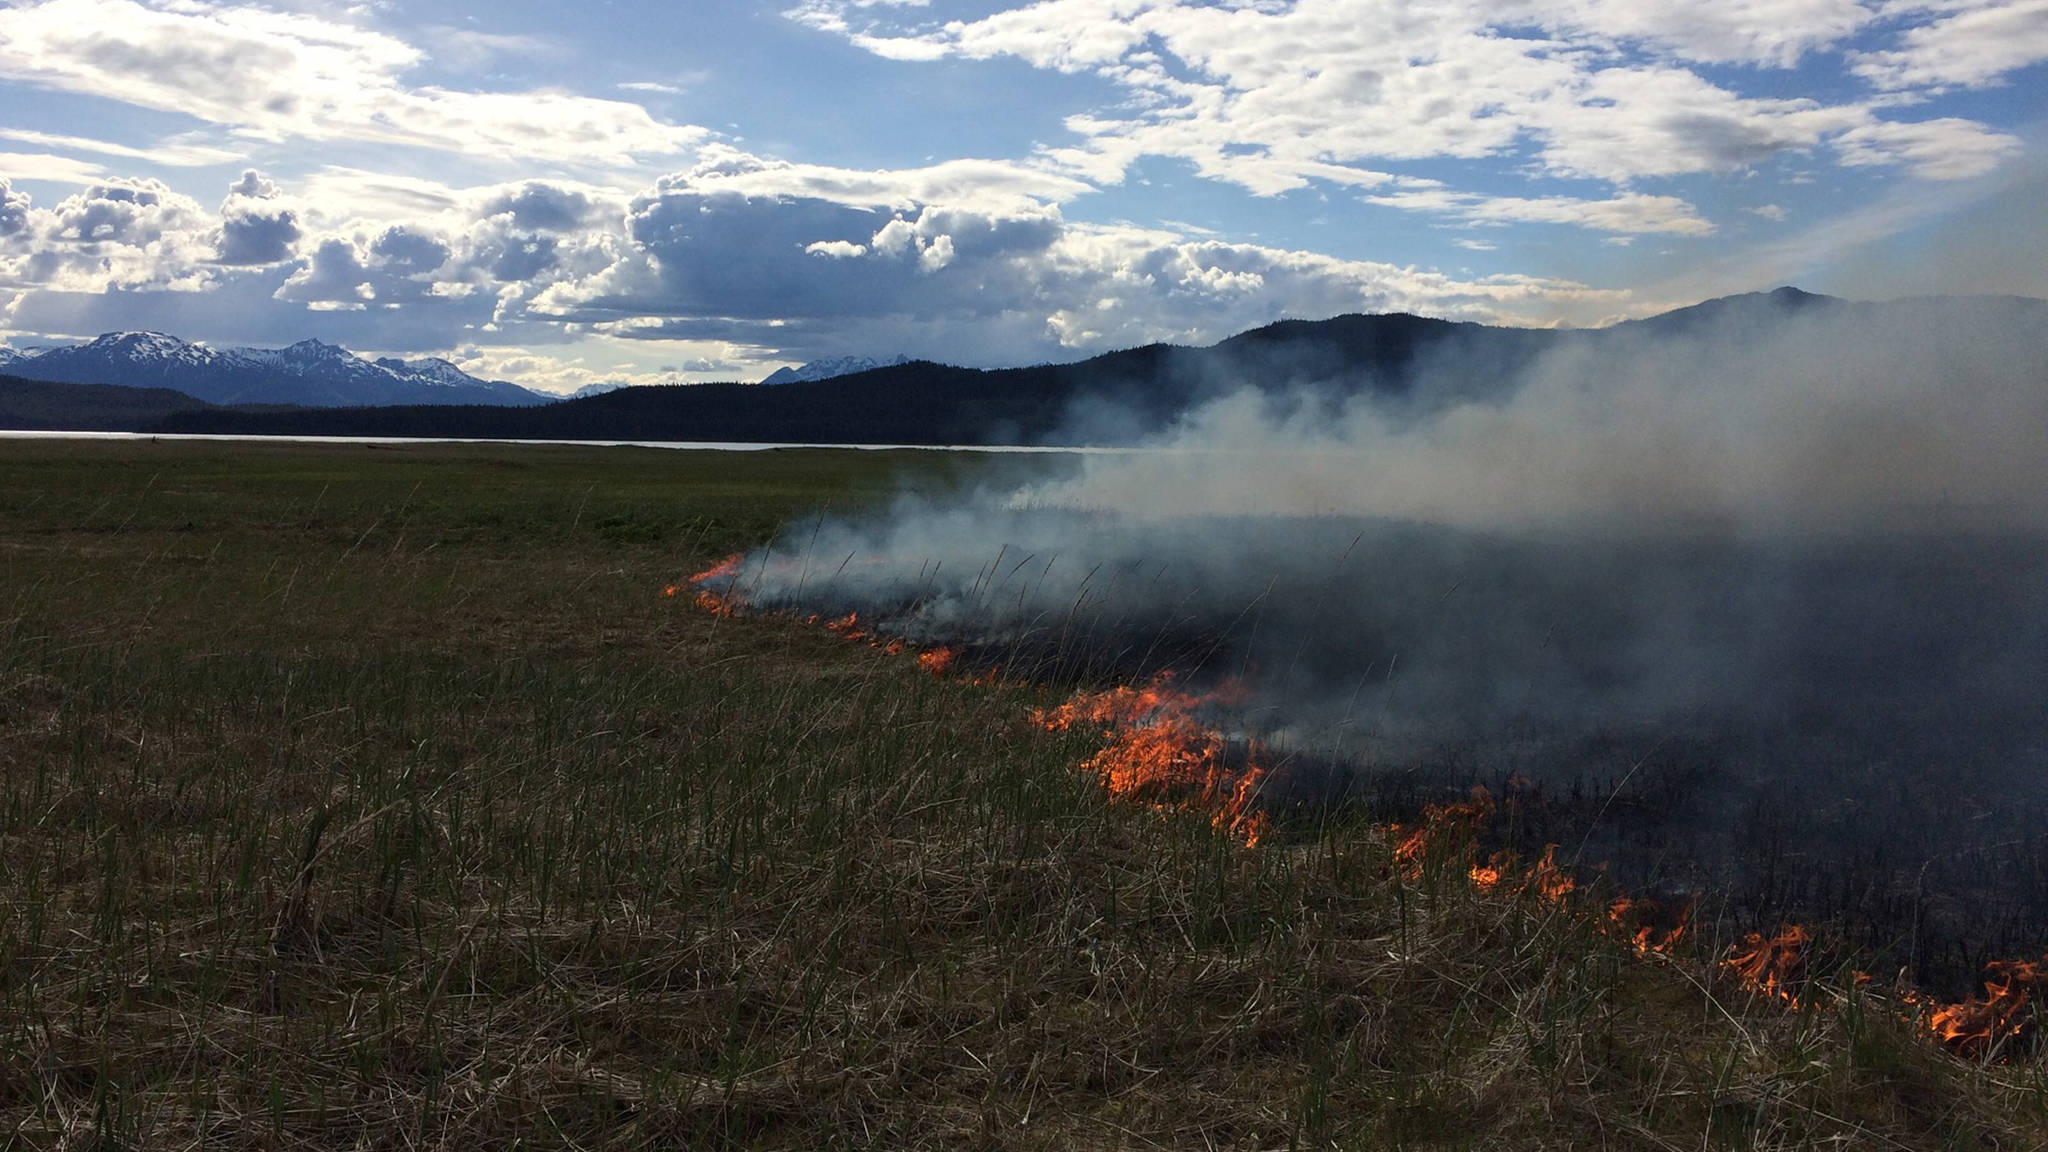 A fire burns on the grass at Antler Flats, in the northeast section of Berners Bay. (Photo courtesy U.S. Forest Service)